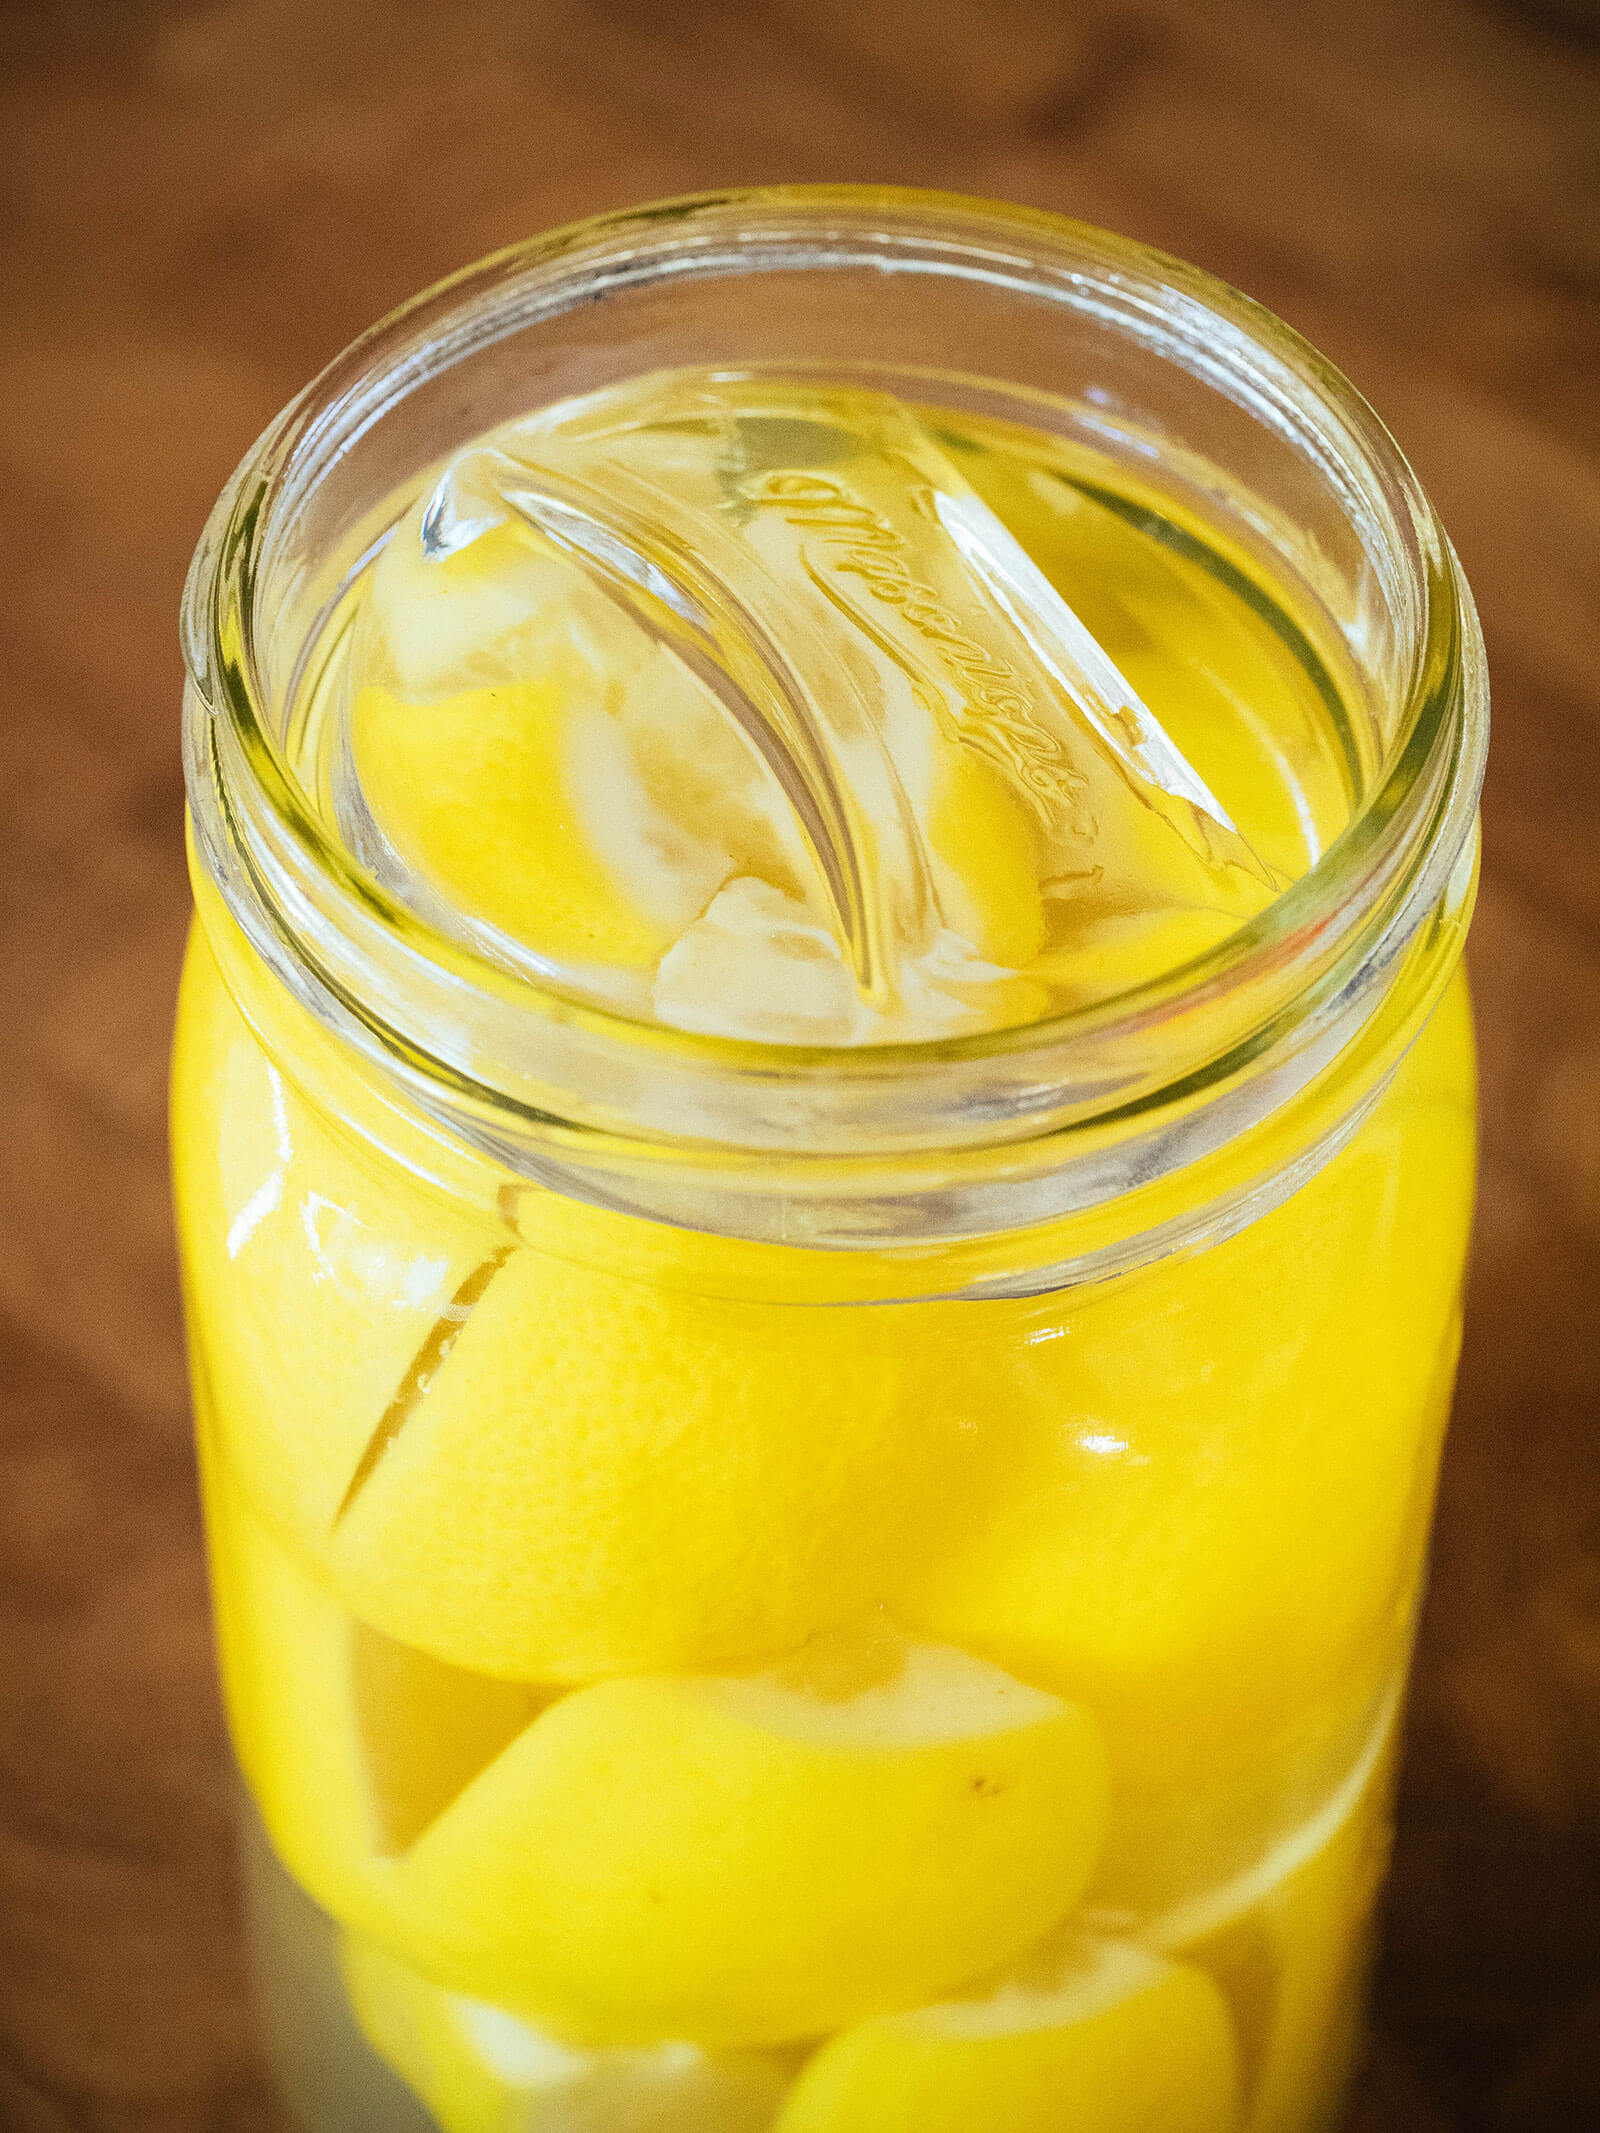 Mason jar full of salted lemons with a glass fermenting weight holding them down